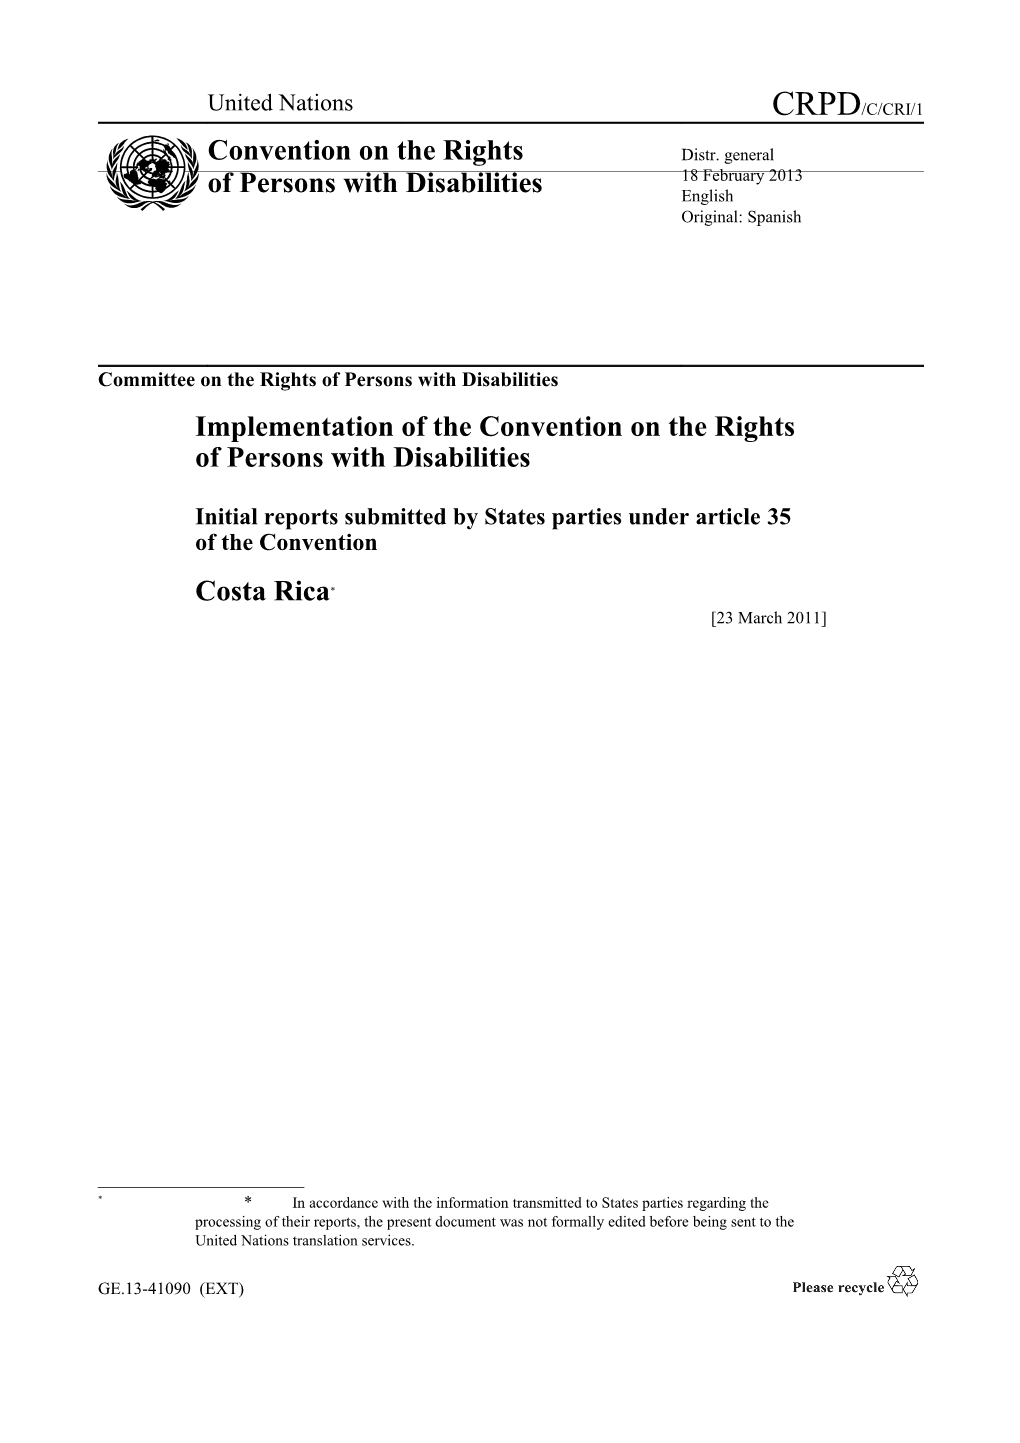 Committee on the Rights of Persons with Disabilities s8